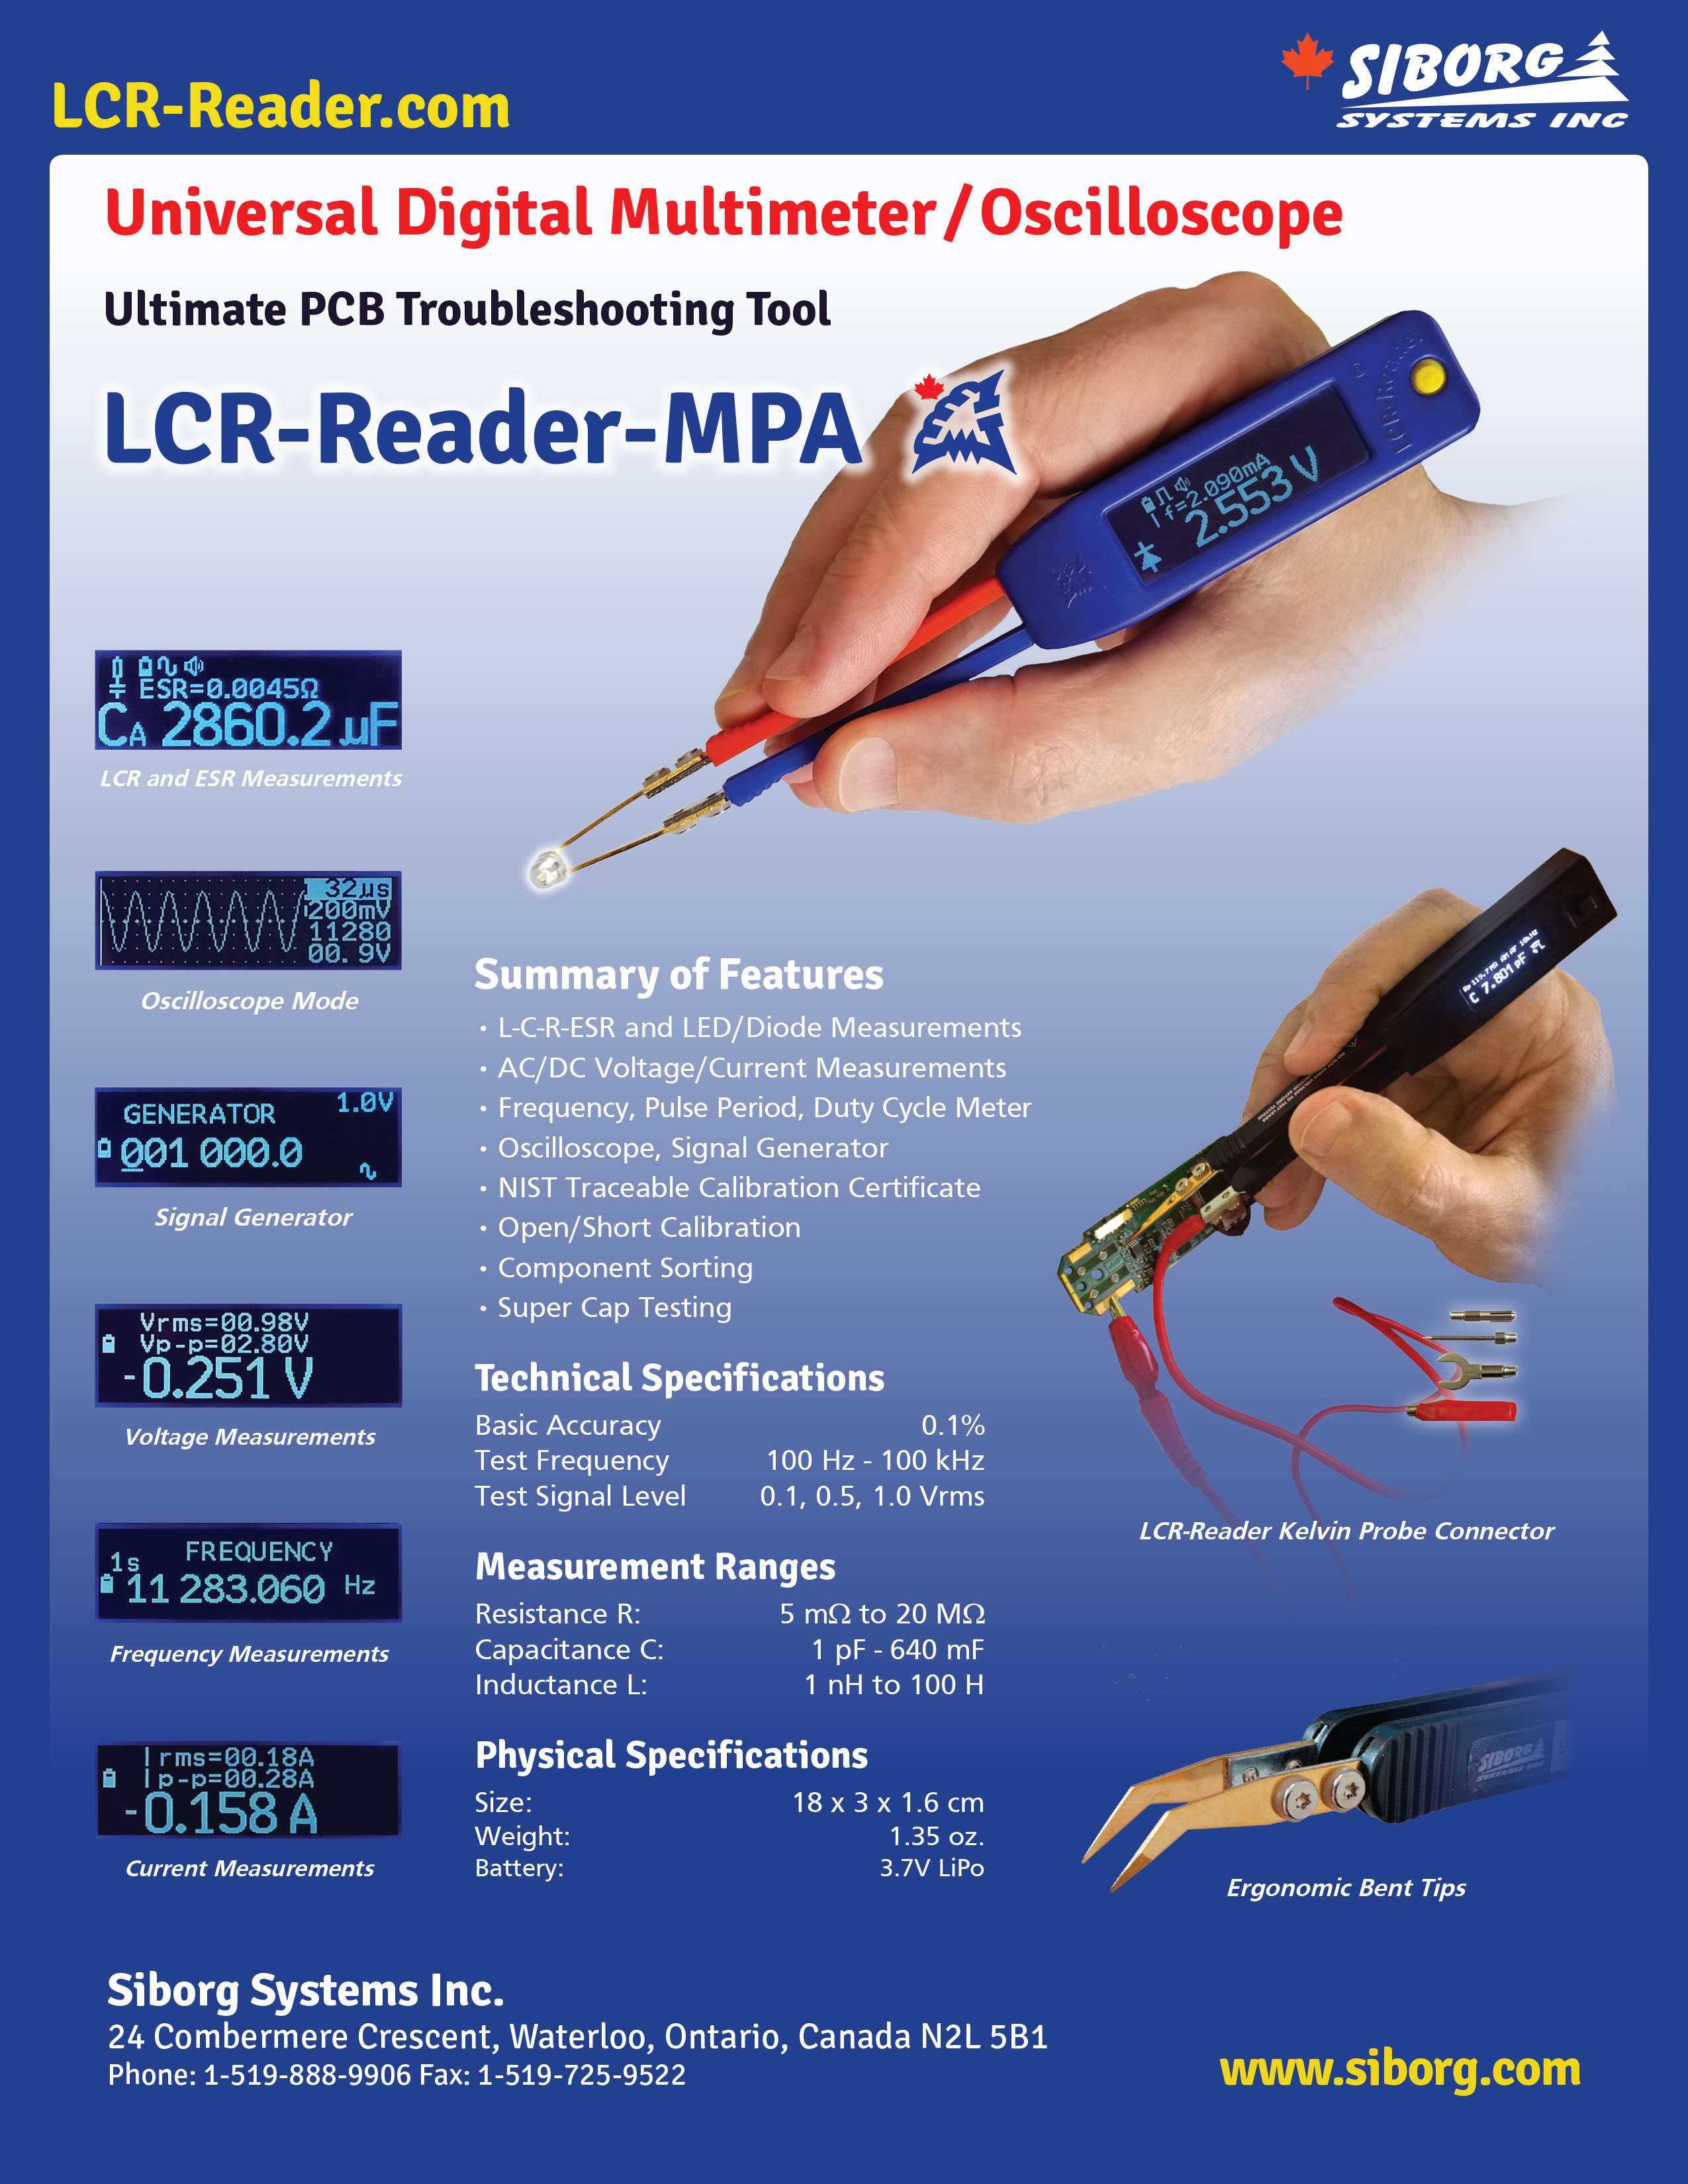 General Specifications of LCR-Reader-MPA from Siborg Systems Inc.